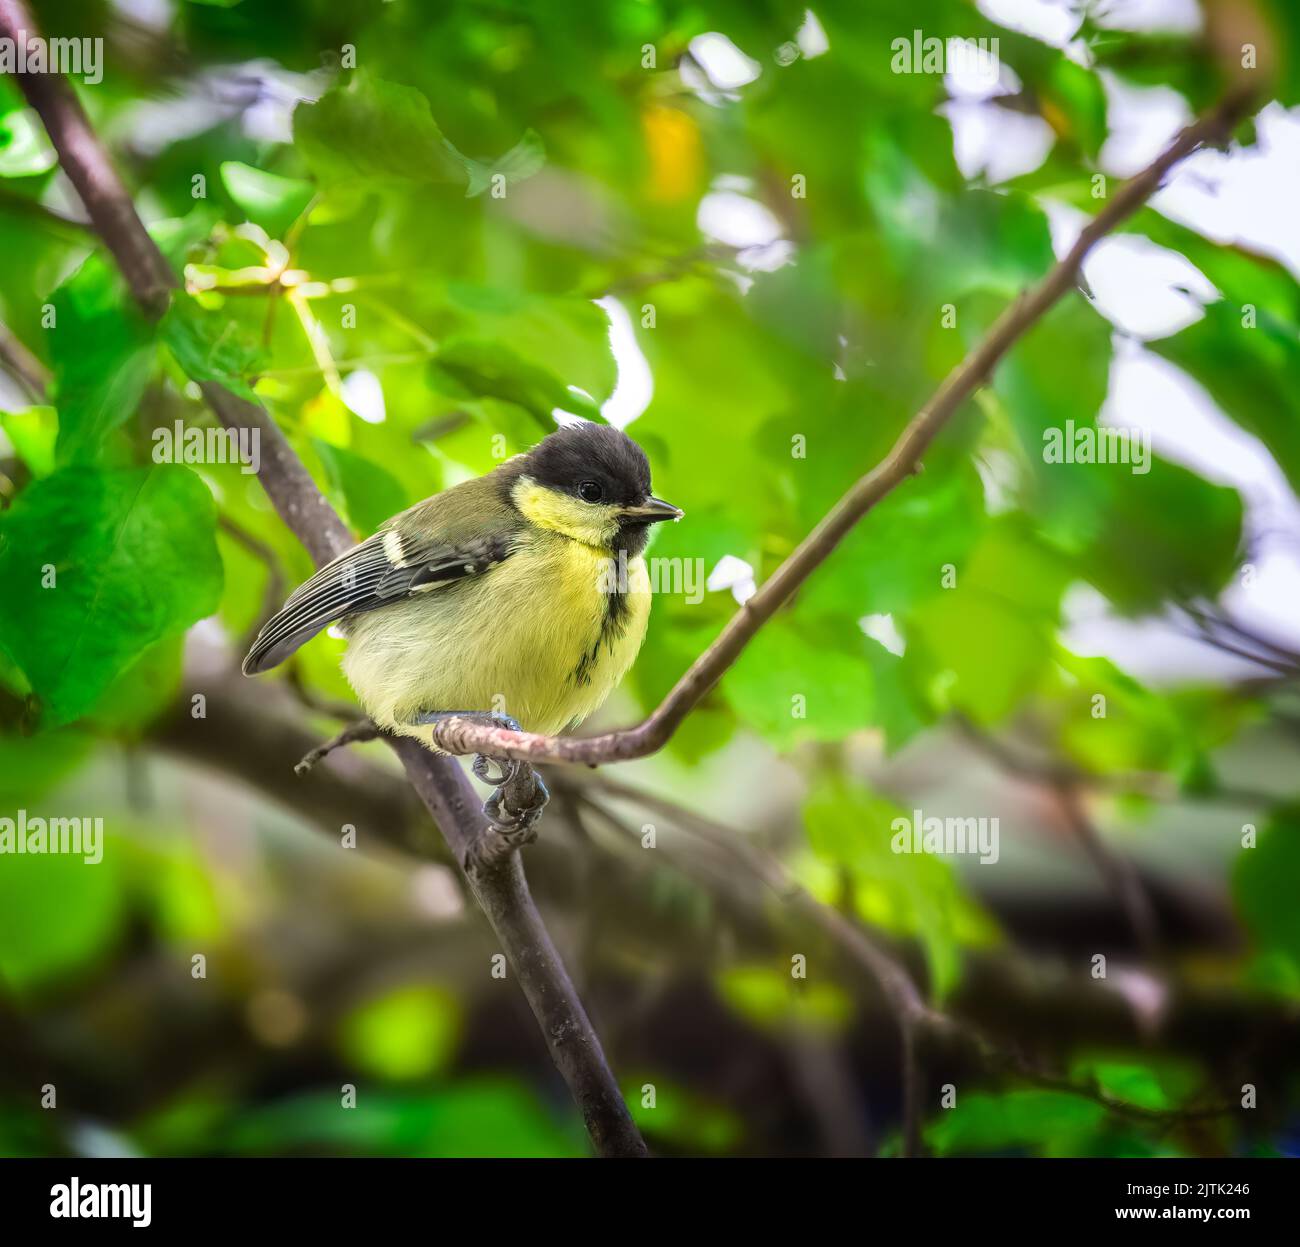 Closeup of a great tit bird sitting in a tree Stock Photo